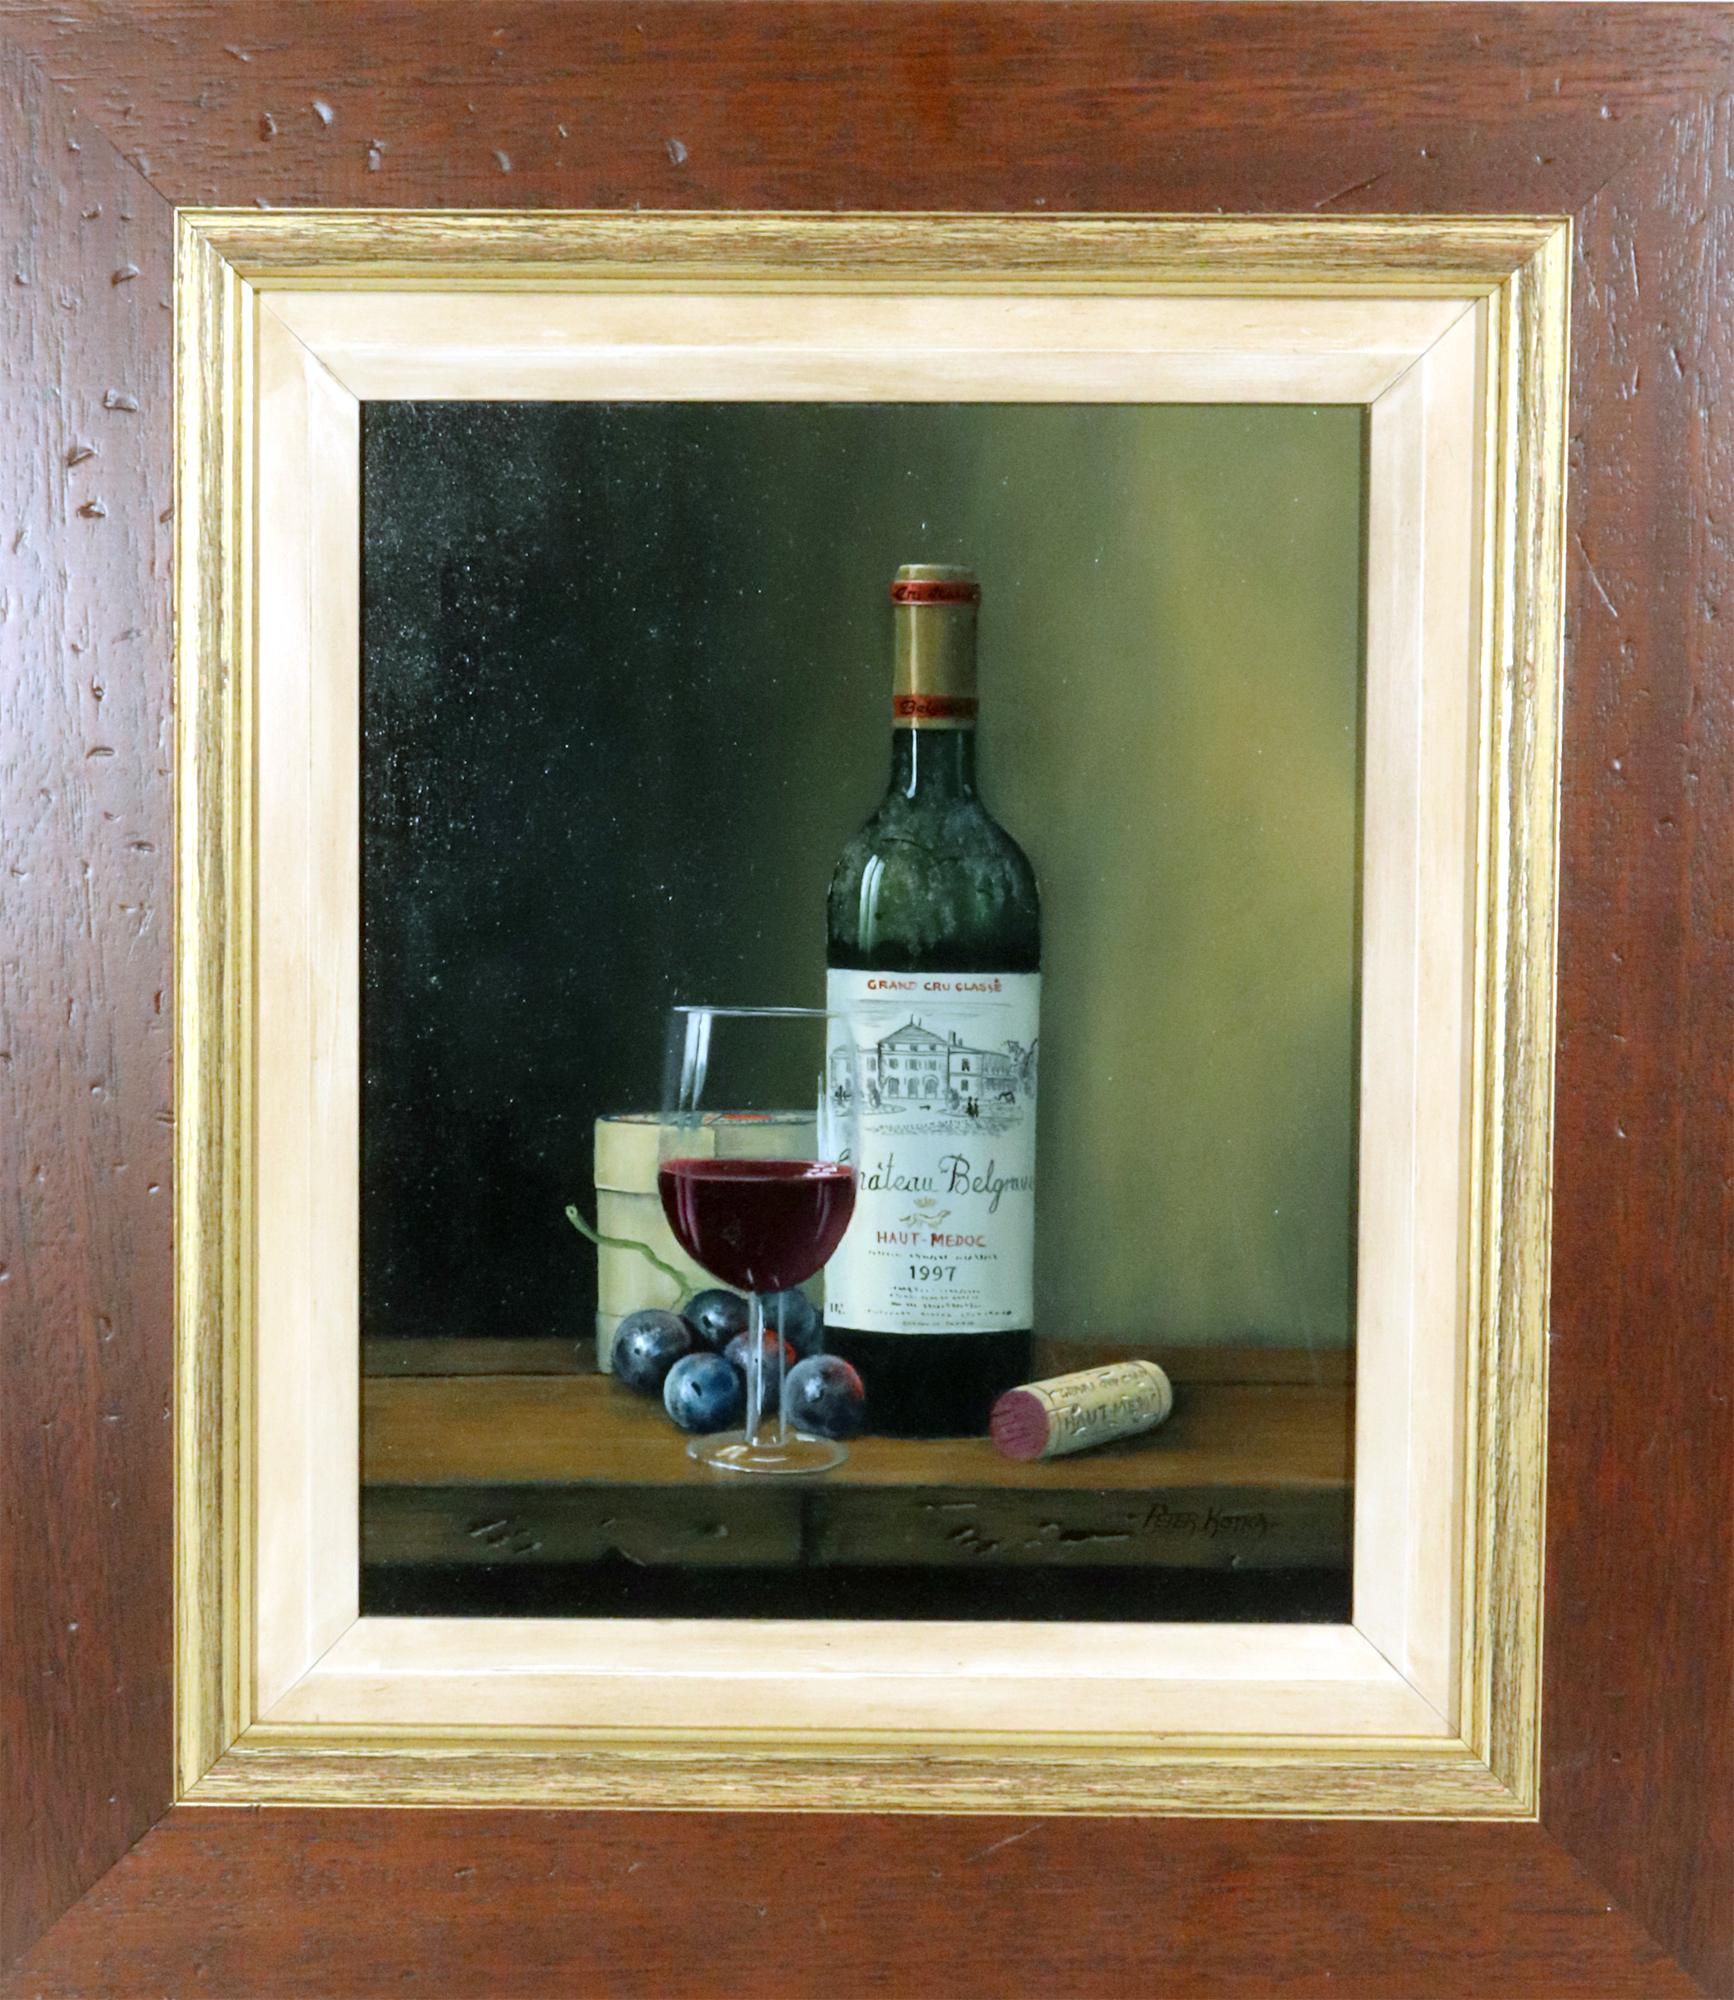 Peter A. Kotka, Stiil Life with Bottle of 1997 Chateau Belgrave Grand Cru Classe, Glass & Cheese
Oil on Linen Panel,
Signed lower right.

The Framed trompe l'oeil still life of a dusty bottle of wine, a half-empty wine glass and a small bunch of